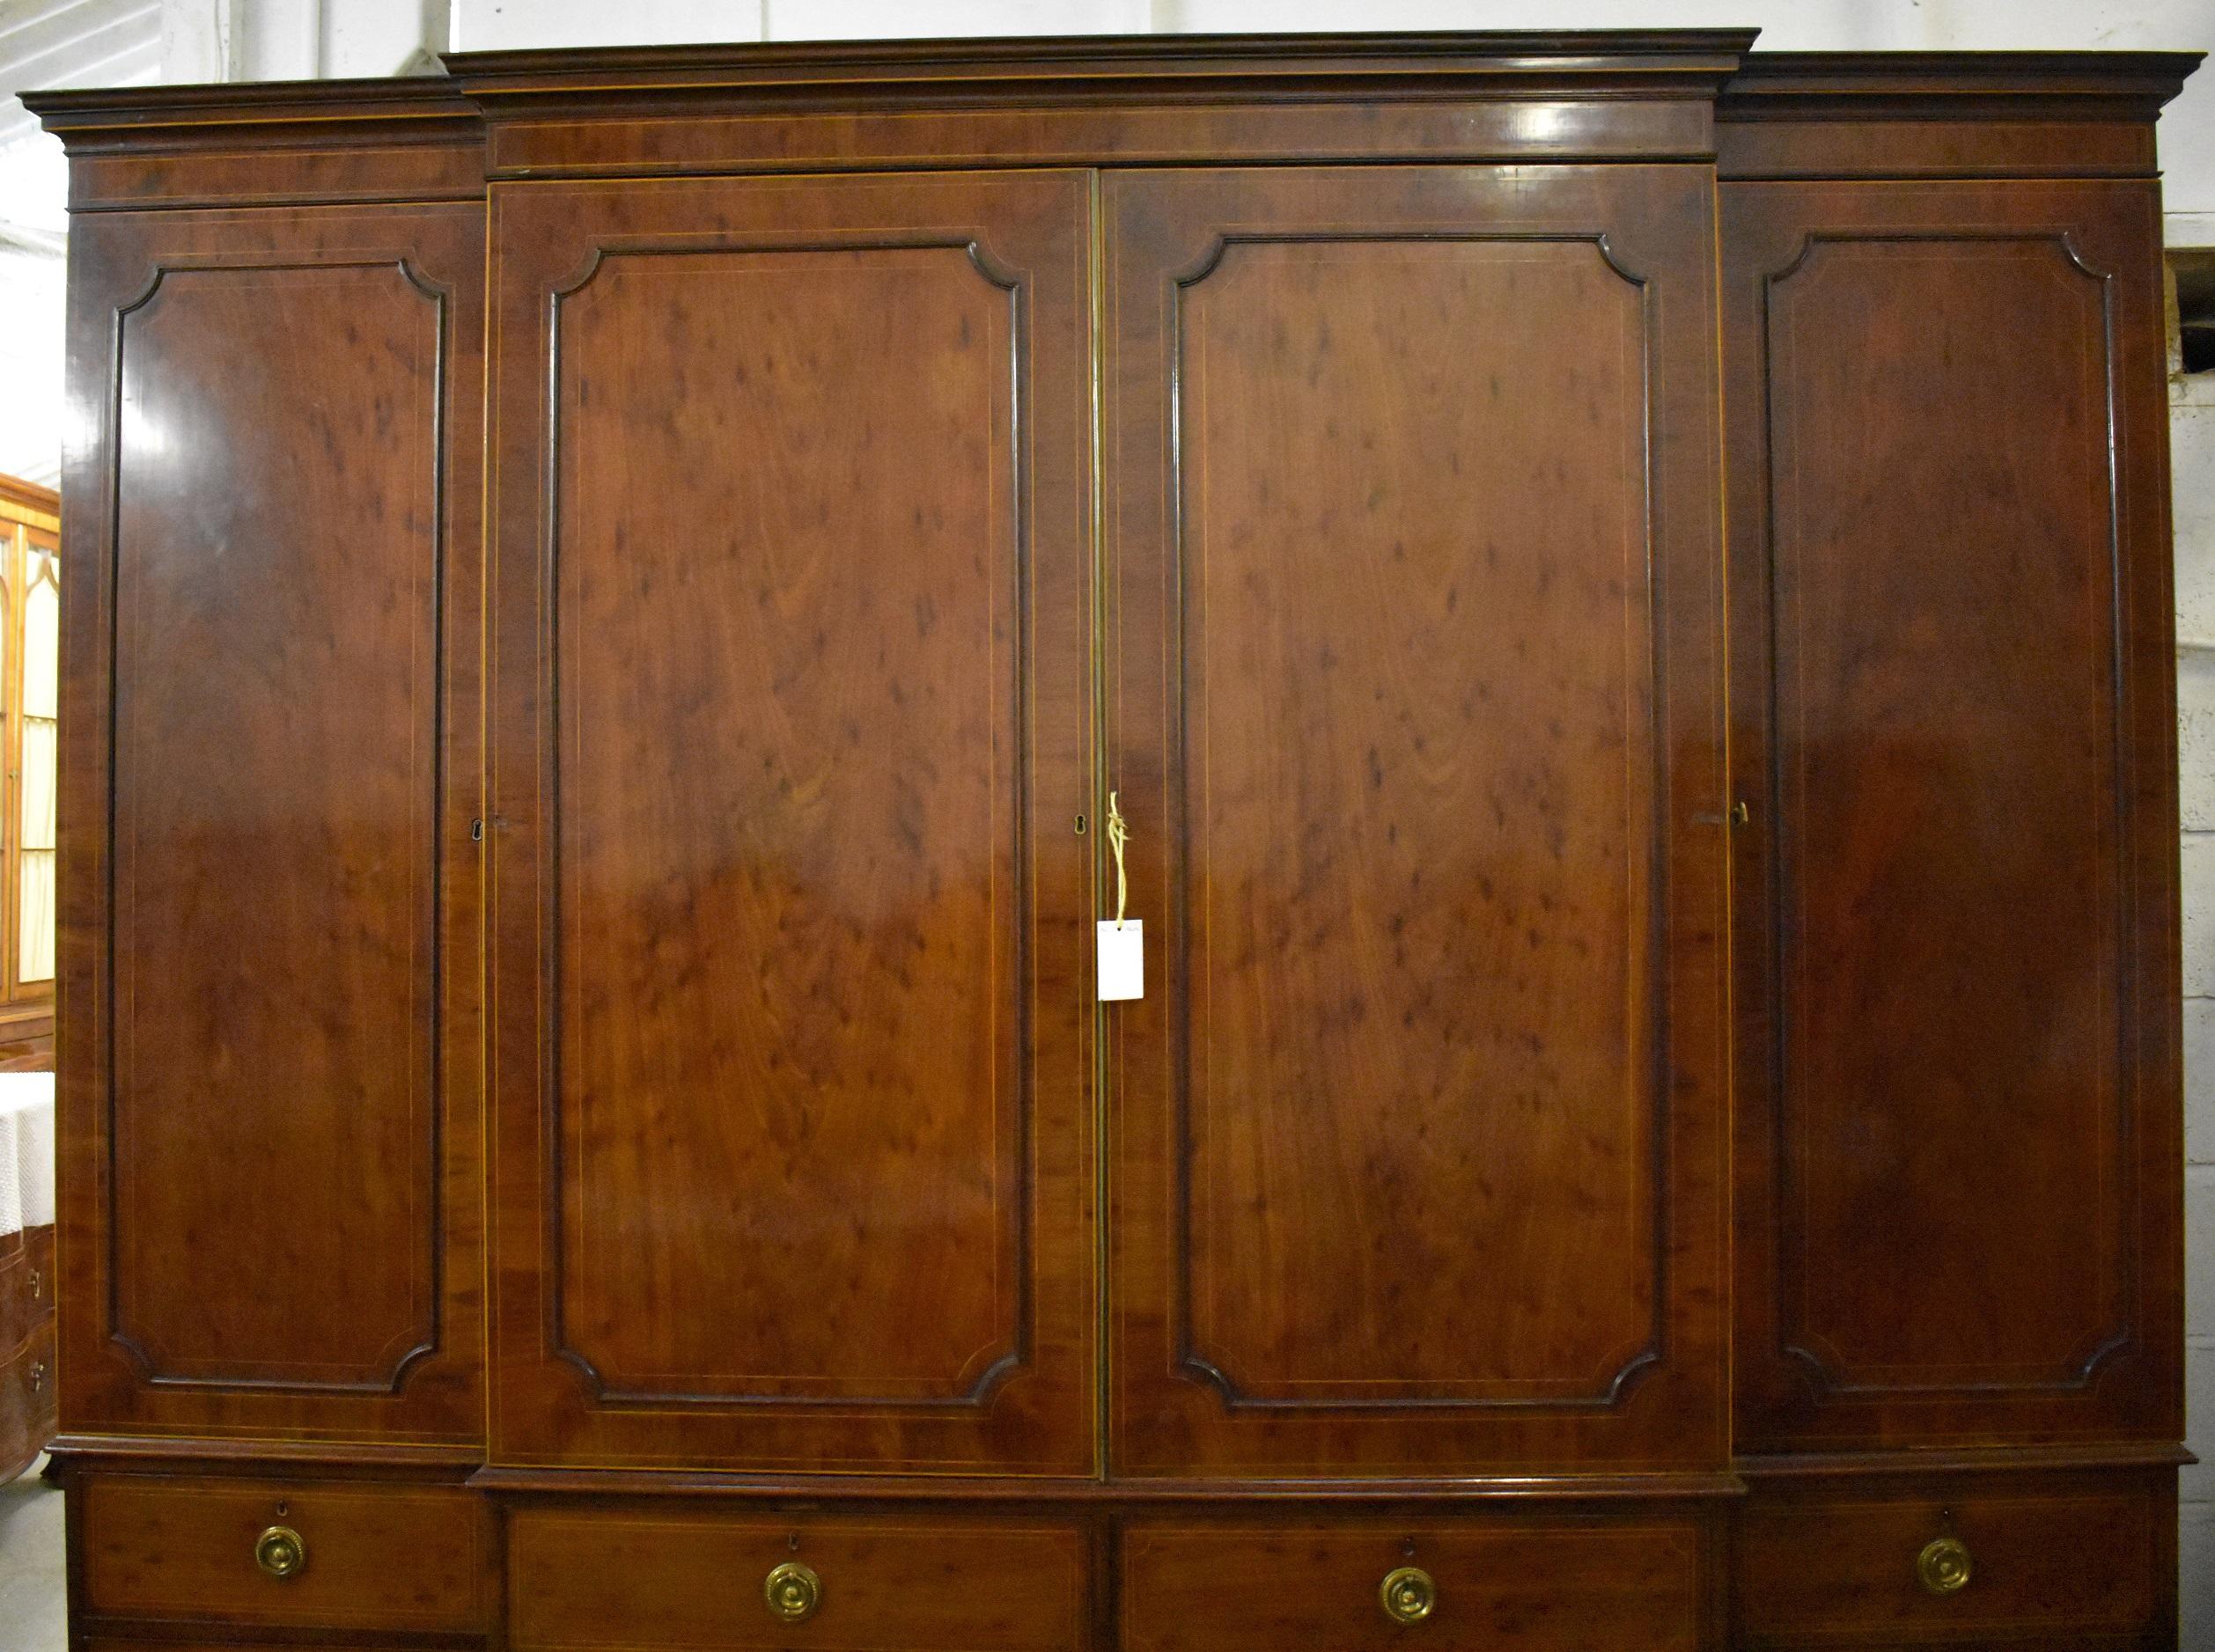 Large George III mahogany breakfront wardrobe. The wardrobe has a flared cornice over four doors, opening to reveal ample hanging space on each end, the centre doors open to reveal multiple adjustable/removable trays. This is above drawers in the